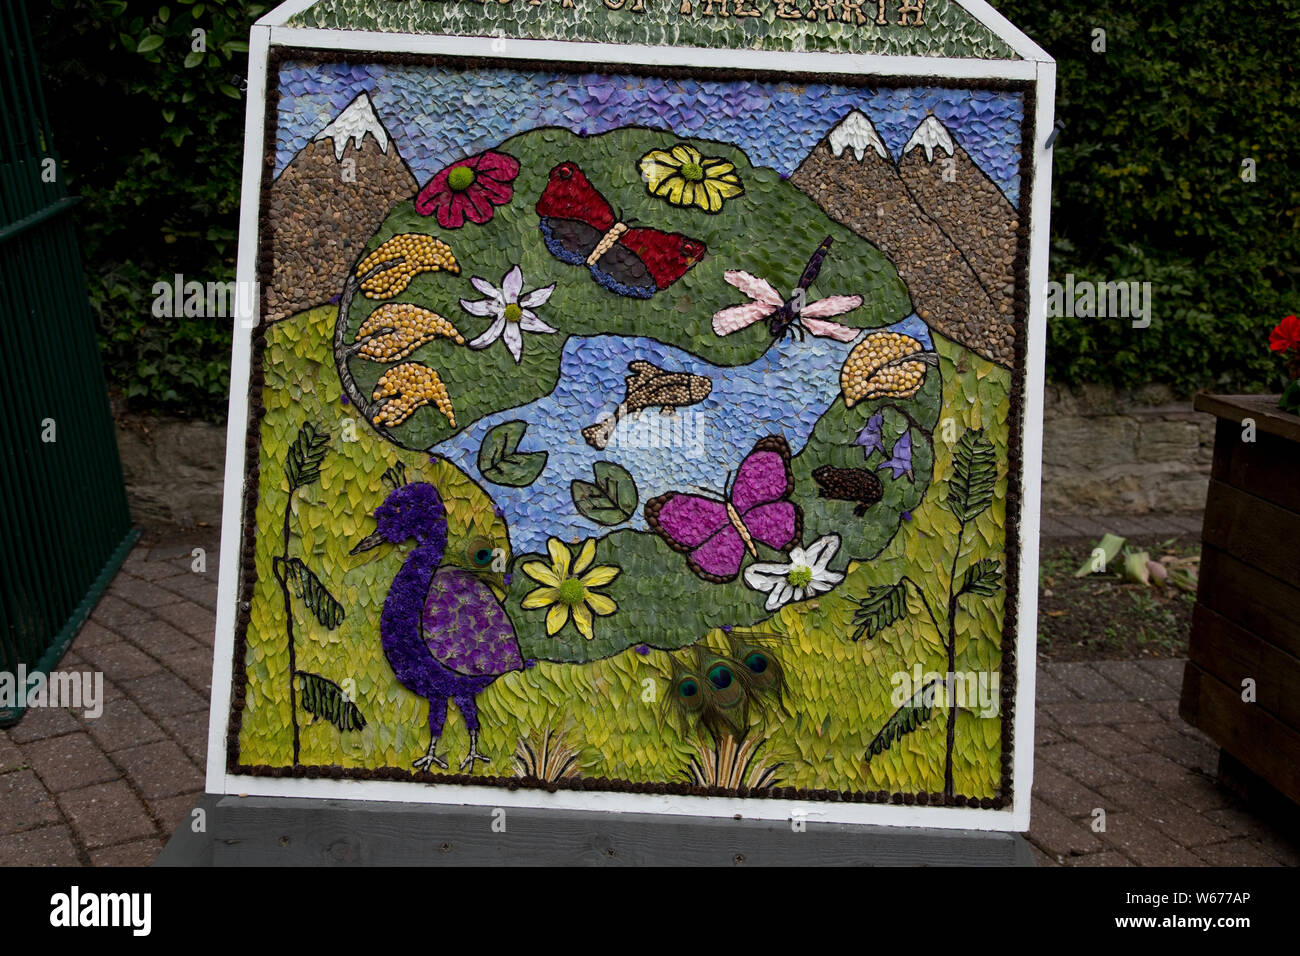 Well dressing in Swanwick - the art of decorating springs and wells with pictures made from natural materials, mainly flowers is an ancient custom fou Stock Photo